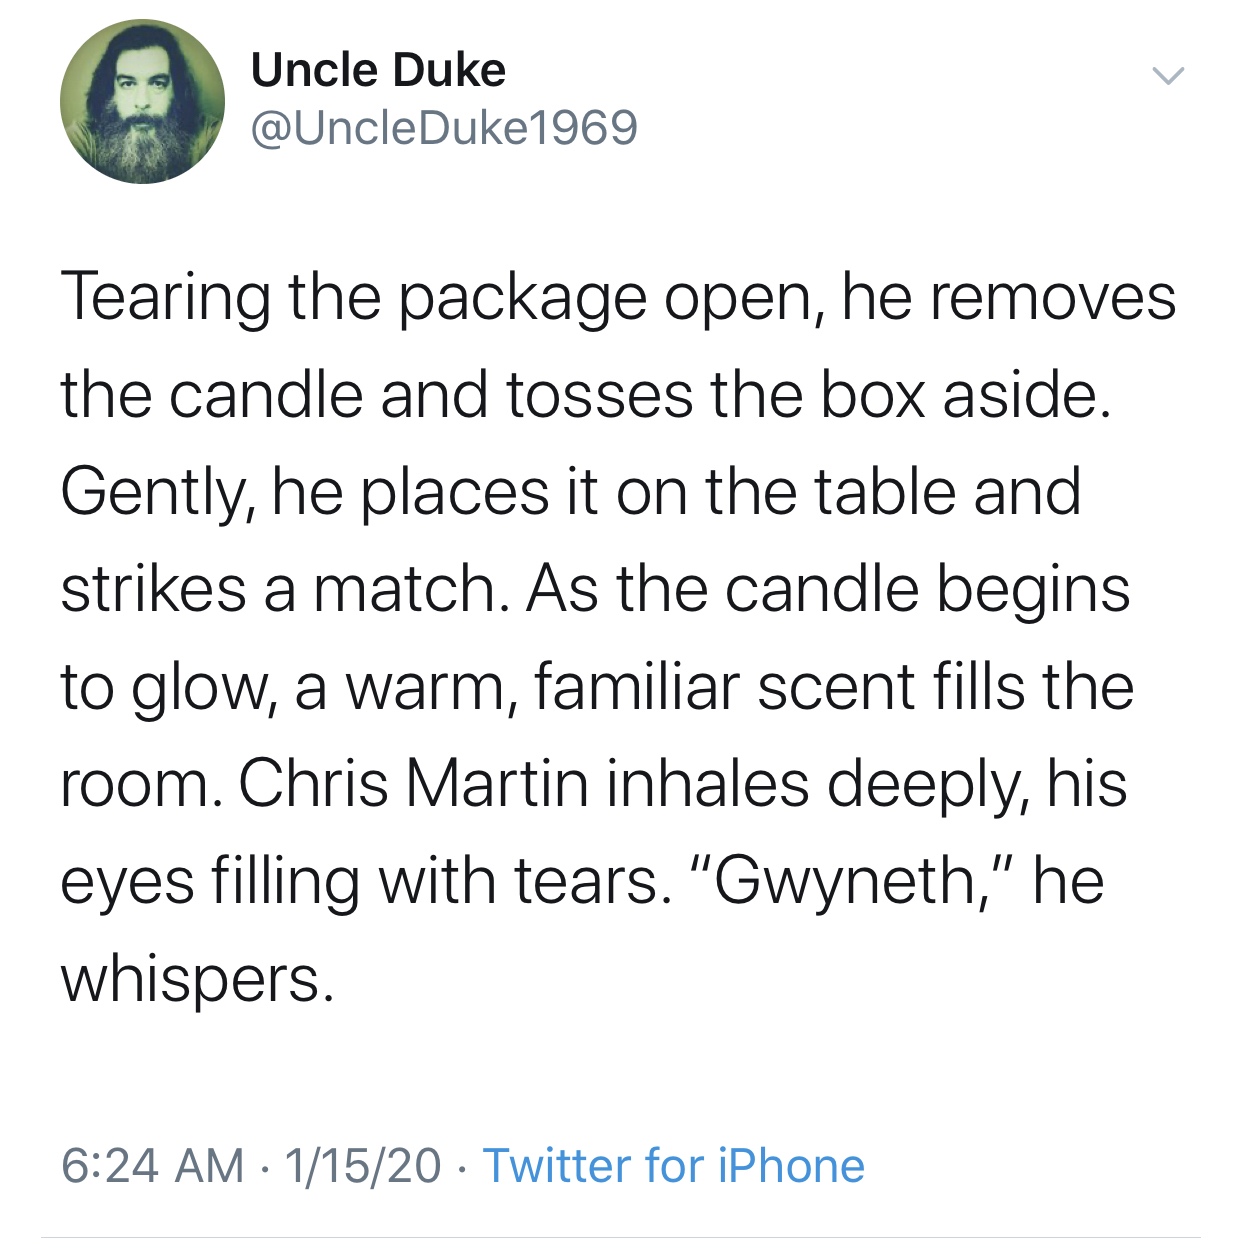 trust quotes - Uncle Duke Tearing the package open, he removes the candle and tosses the box aside. Gently, he places it on the table and strikes a match. As the candle begins to glow, a warm, familiar scent fills the room. Chris Martin inhales deeply, hi